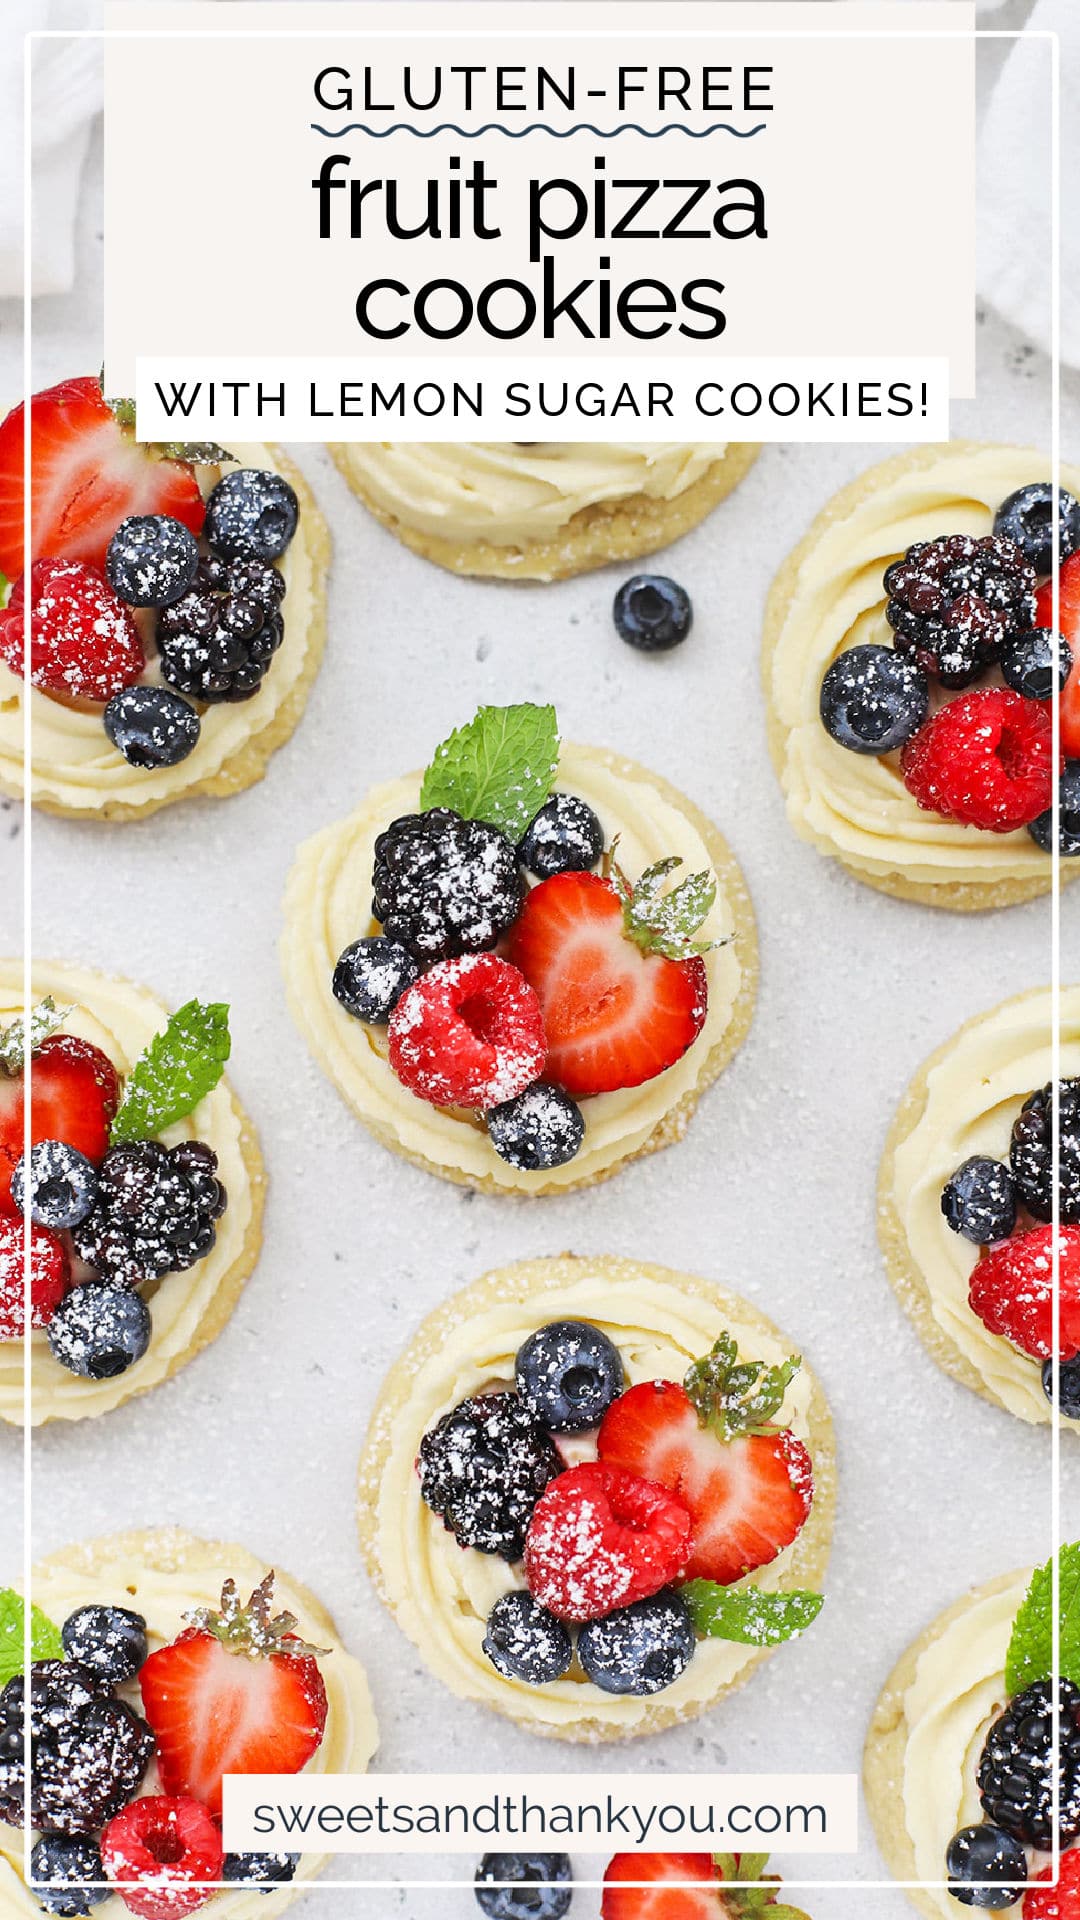 Mini Fruit Pizza Cookies - These mini gluten-free fruit pizzas are made from gluten-Free lemon sugar cookies, a light cream cheese frosting, and fresh berries. They're beautiful and easy! // Gluten-Free Fruit Pizza // Mini Fruit Pizzas // Fruit pizza cookie recipe // Gluten Free lemon cookies